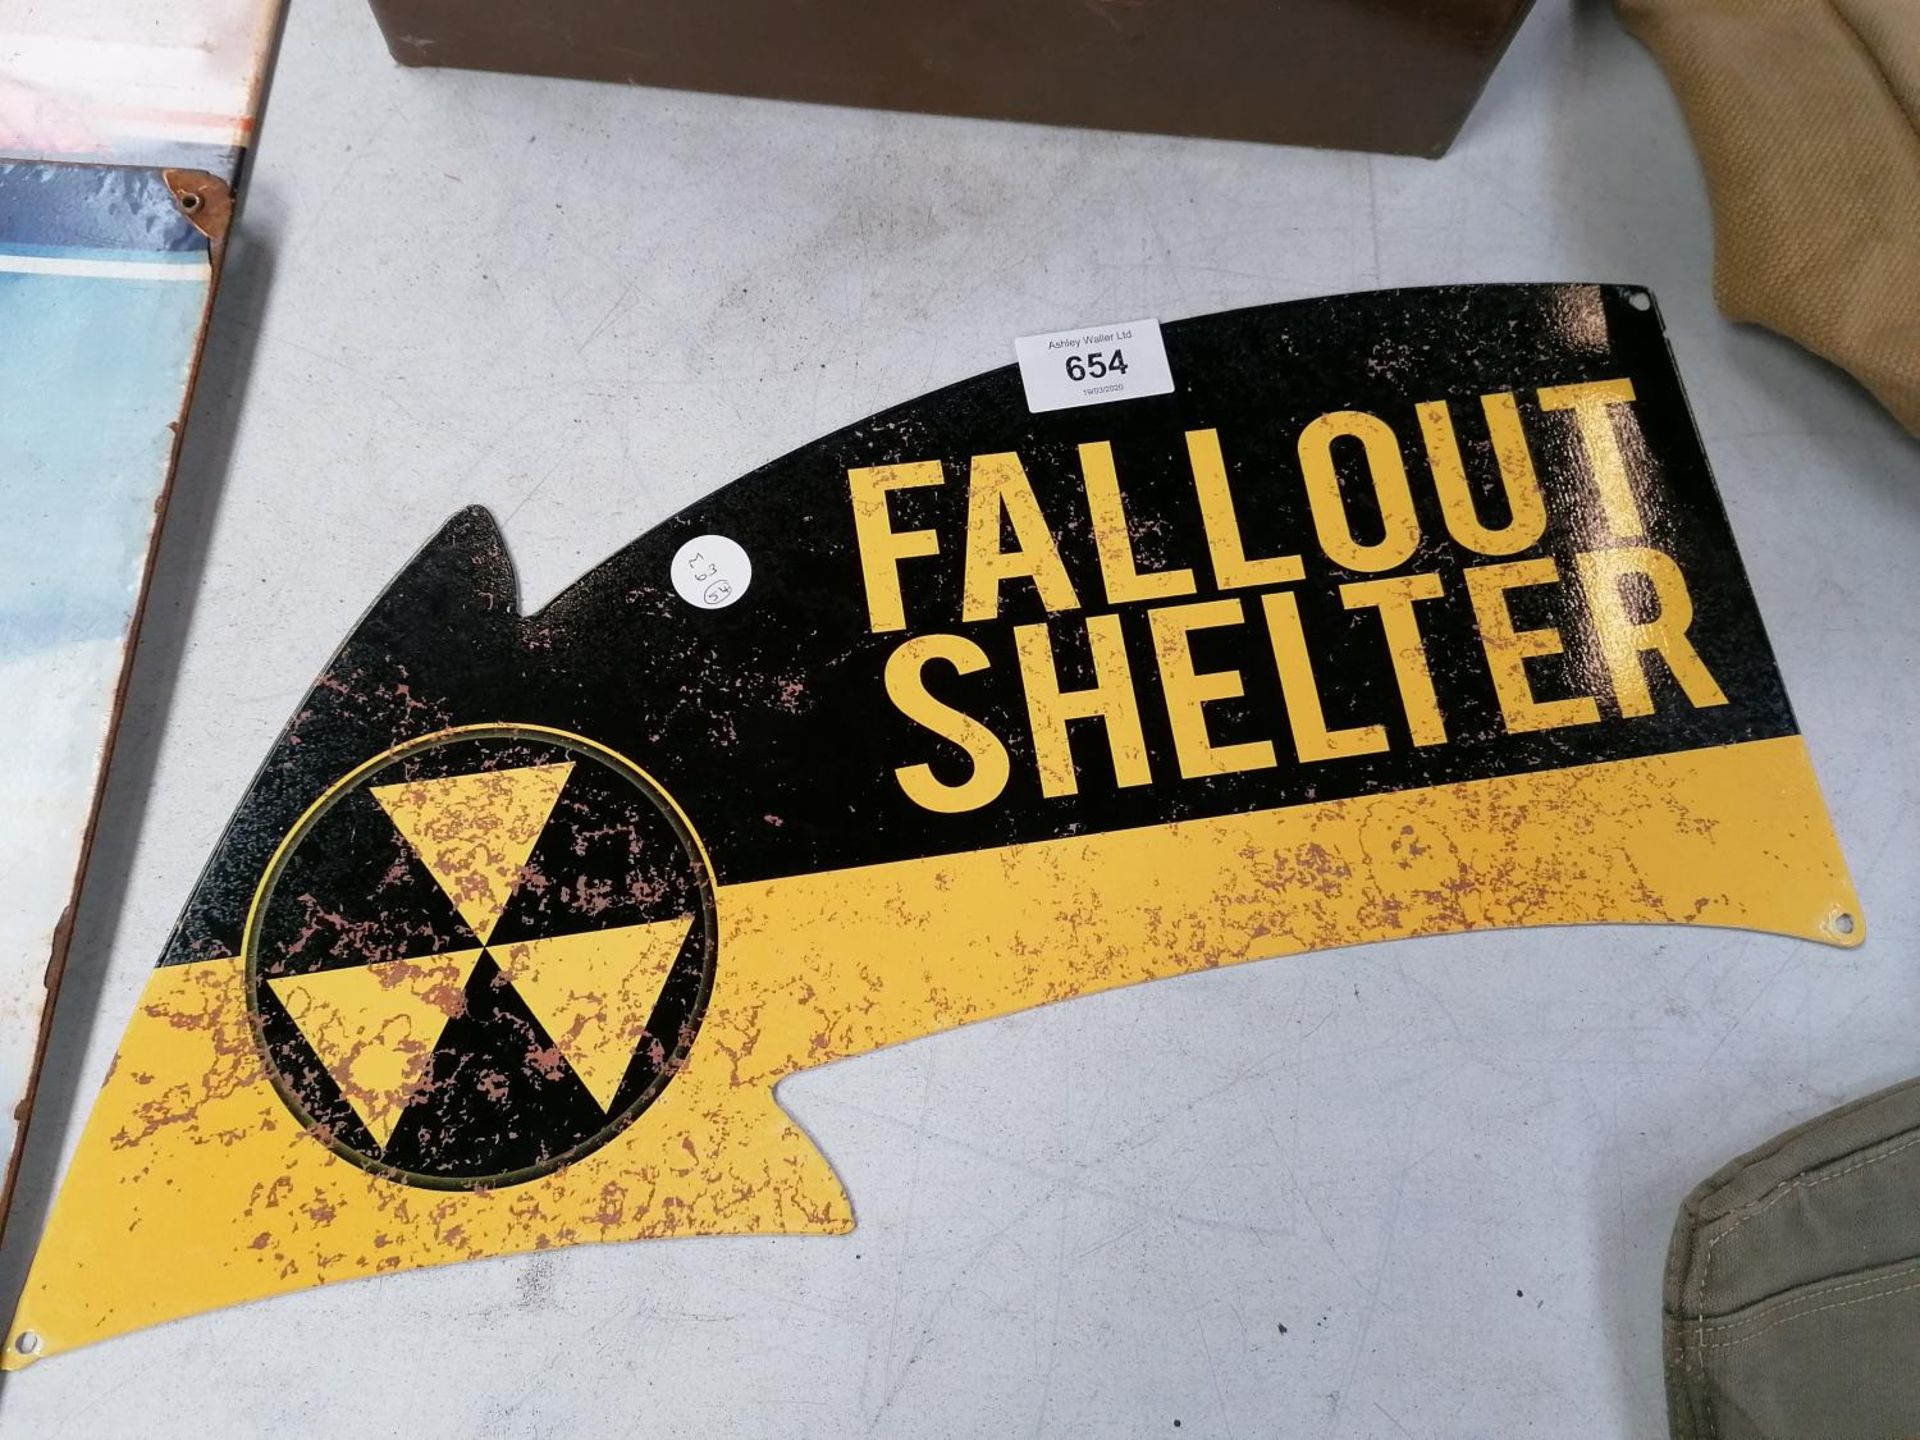 A FALLOUT SHELTER METAL SIGN